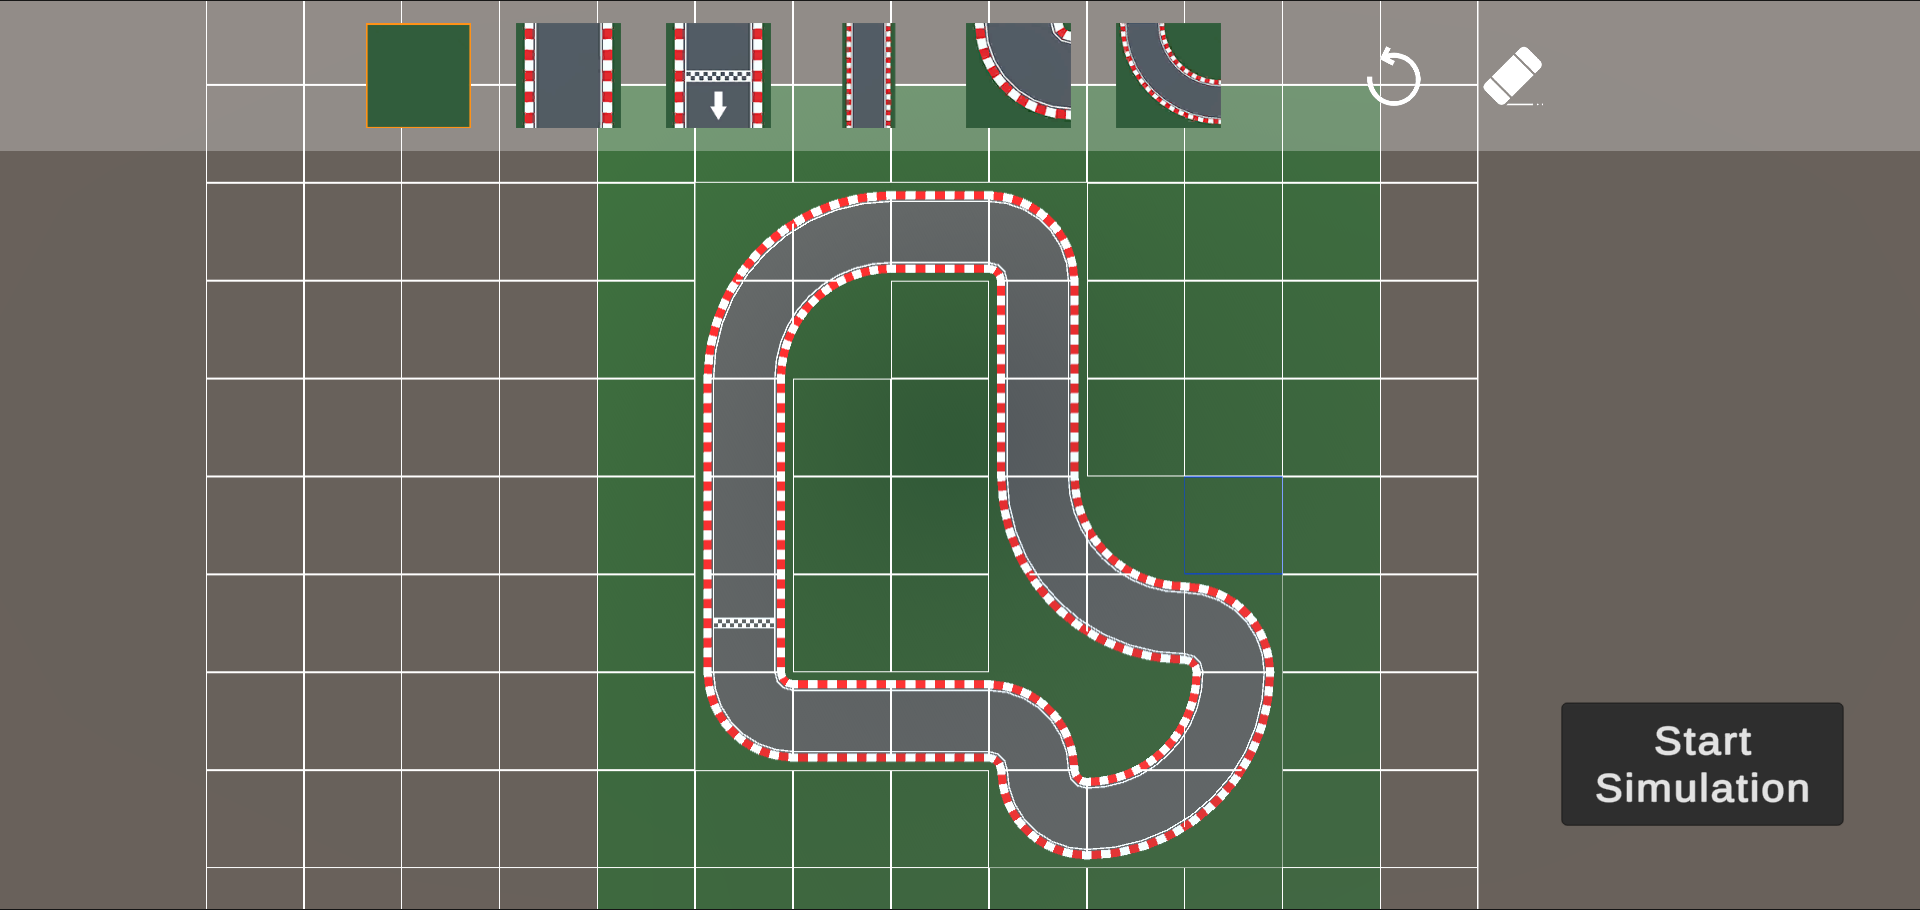 A different track option